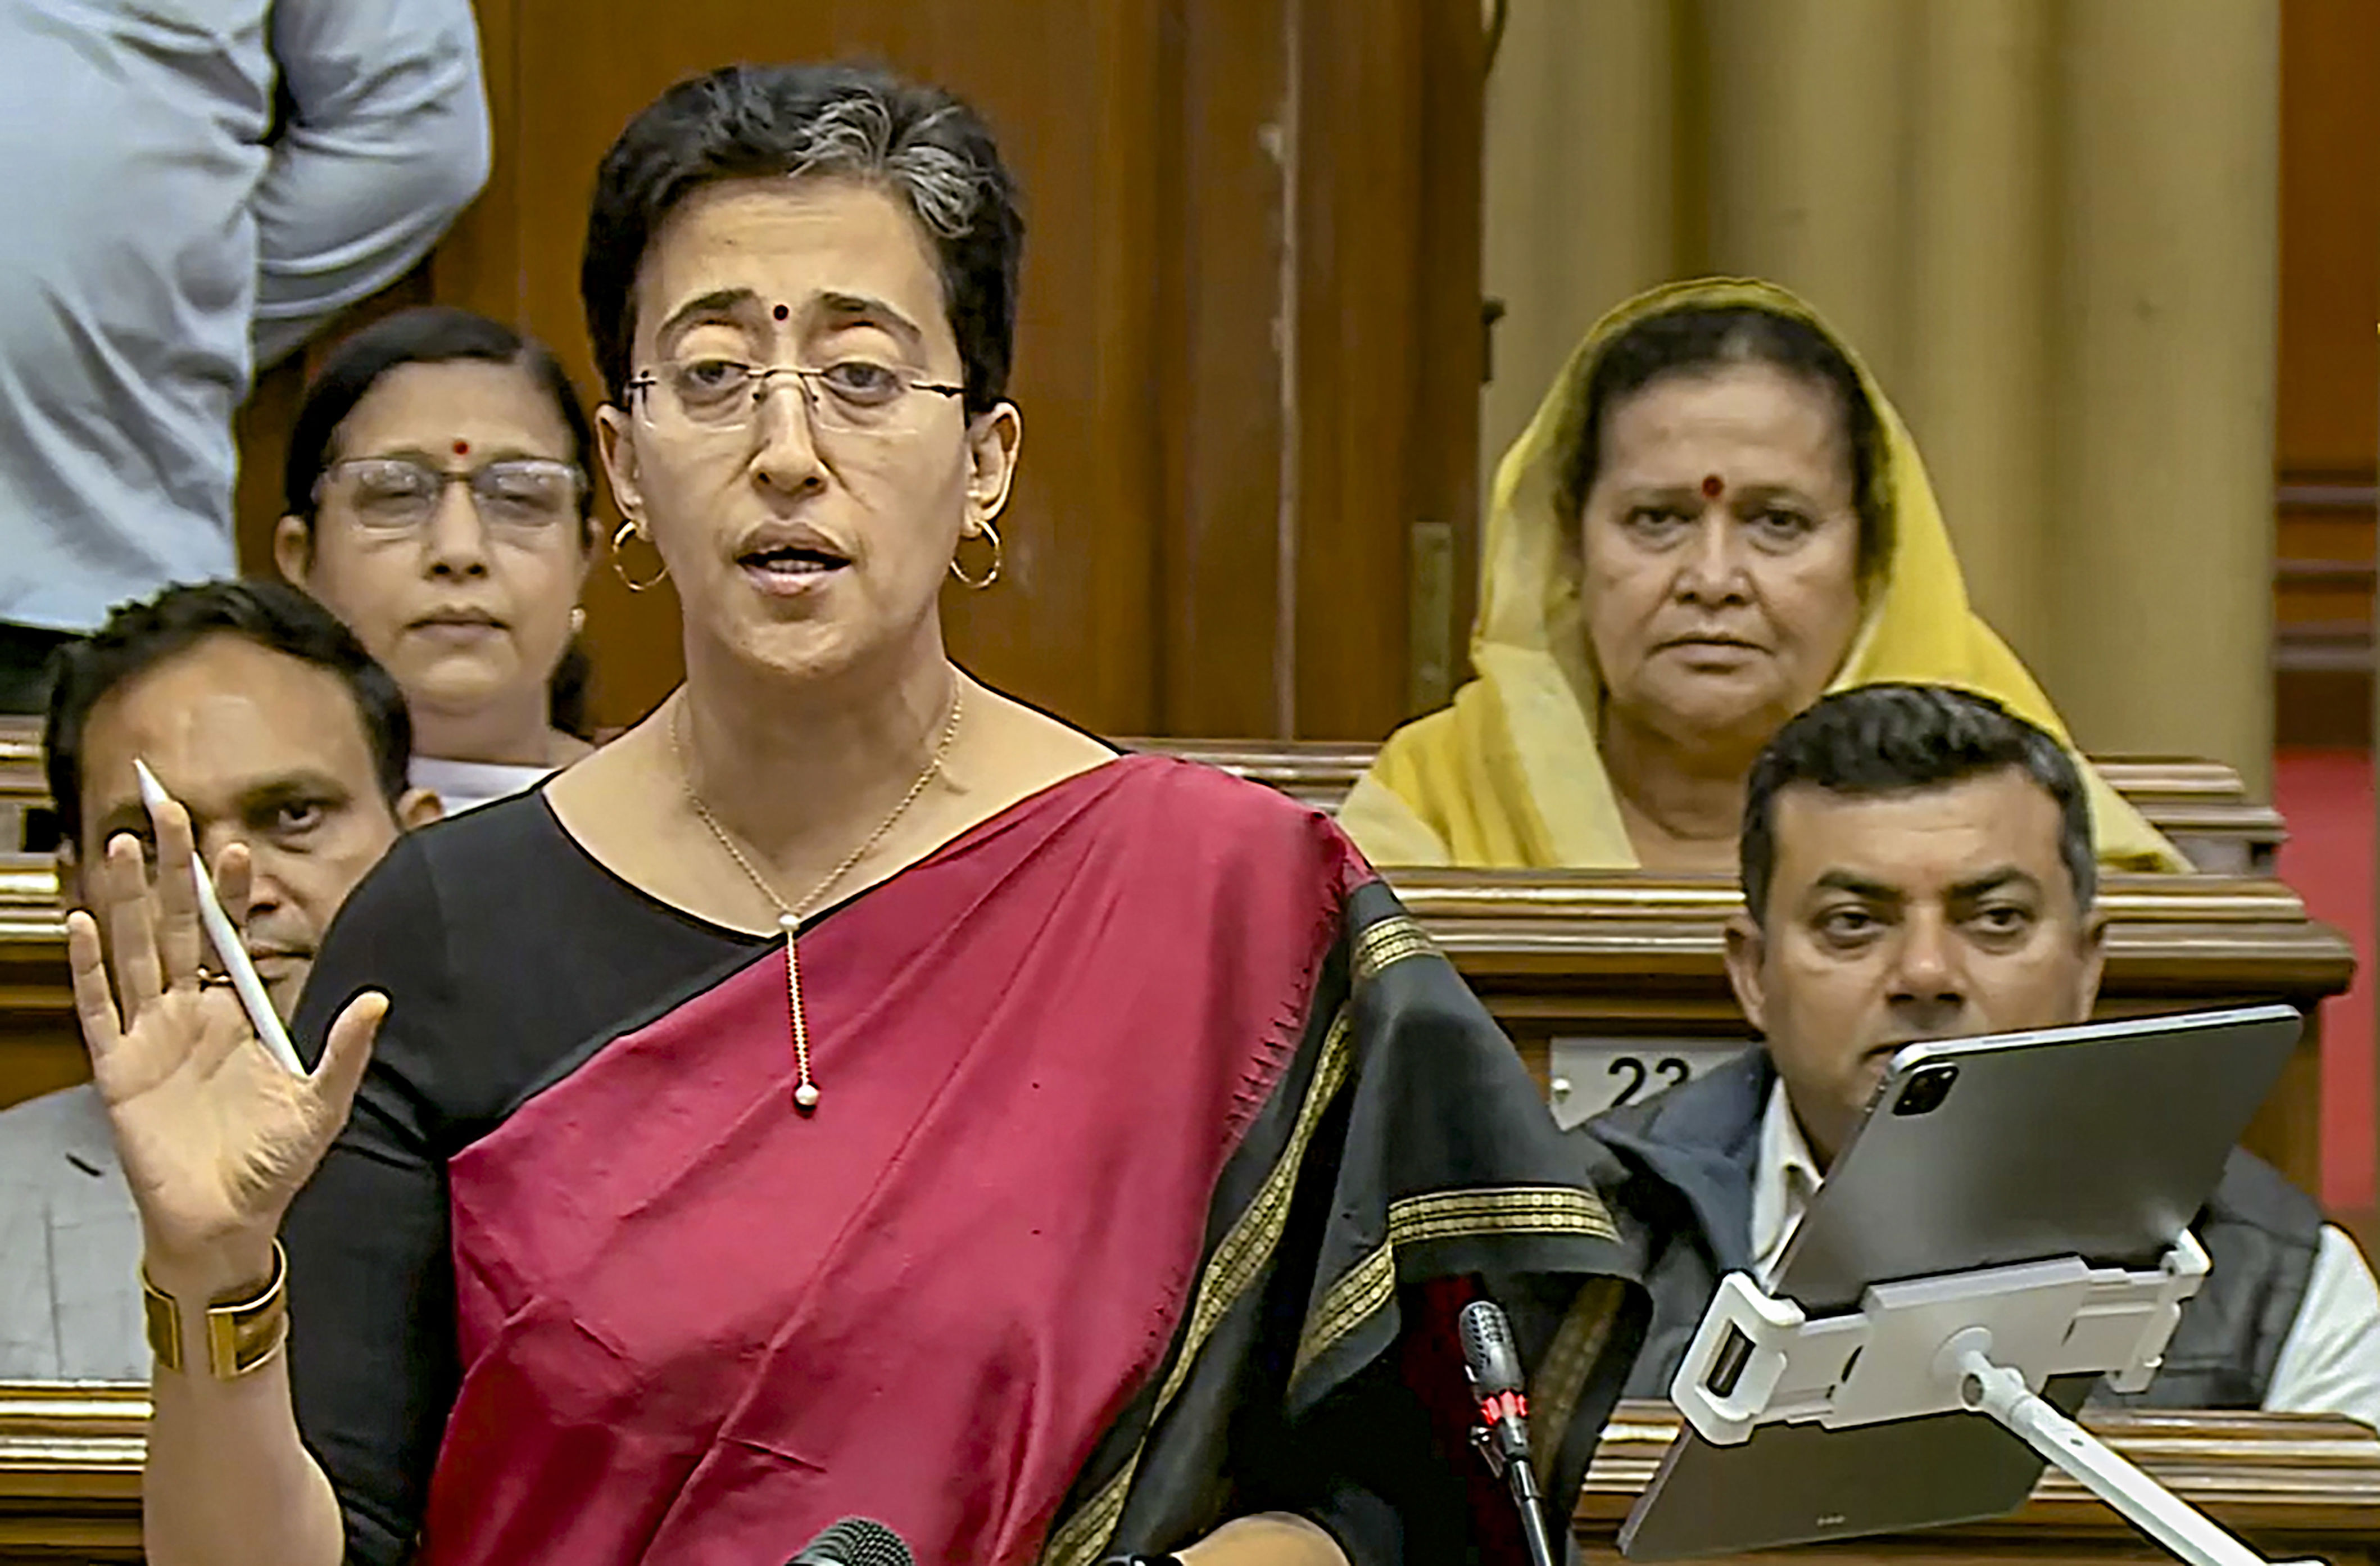 delhi metro gets rs 500 crore in budget, over 60 lakh passengers use service every day: atishi